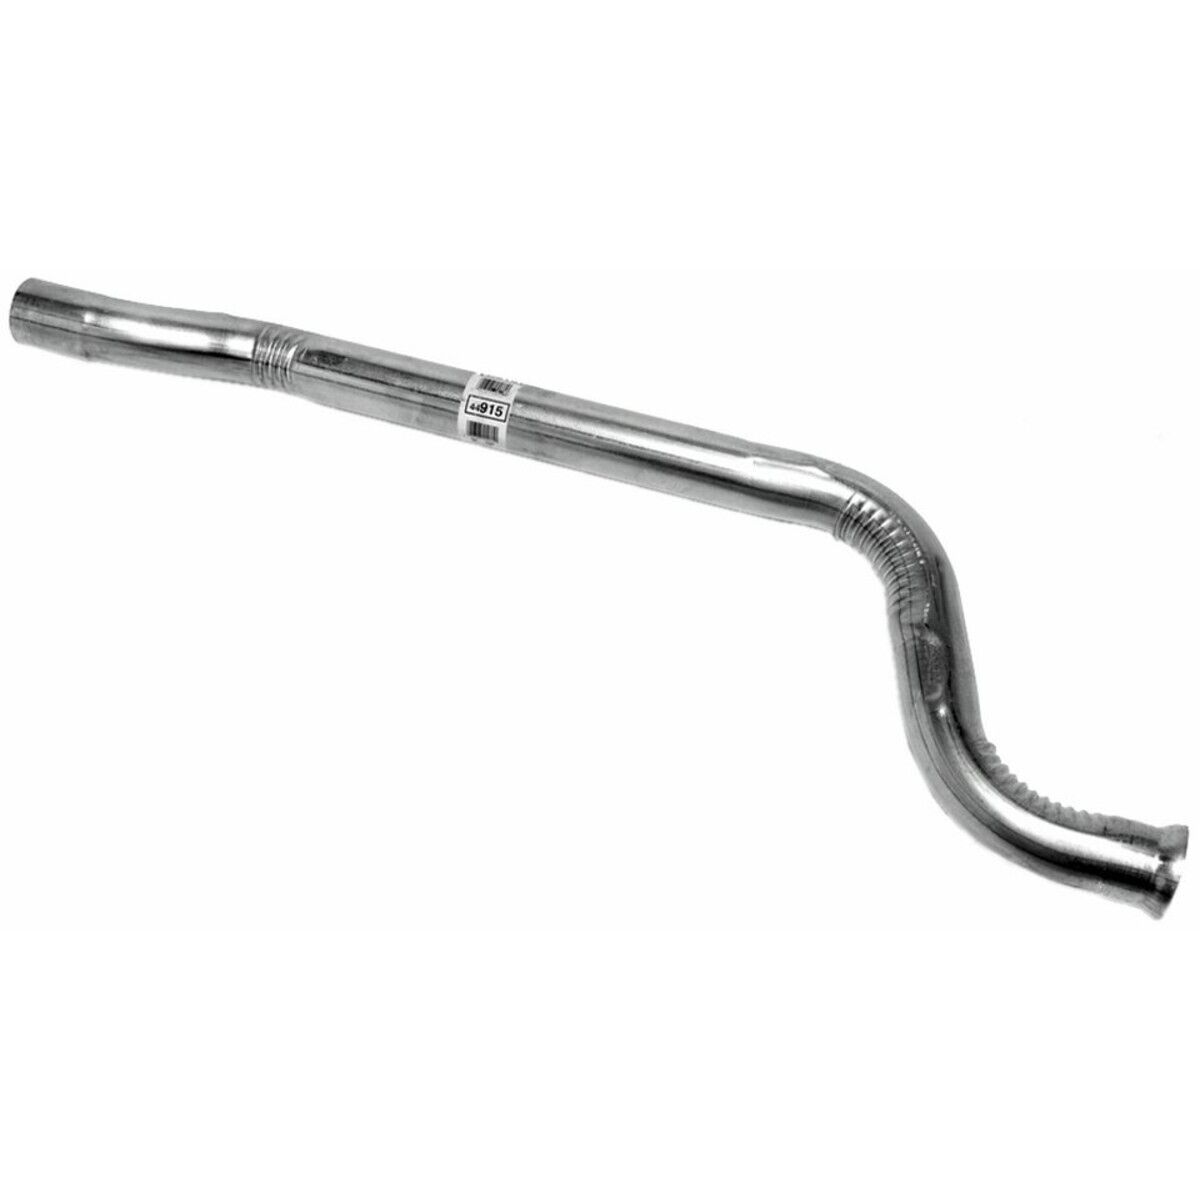 44915 Walker Exhaust Pipe for Chevy Olds Sedan Chevrolet Impala Caprice Buick